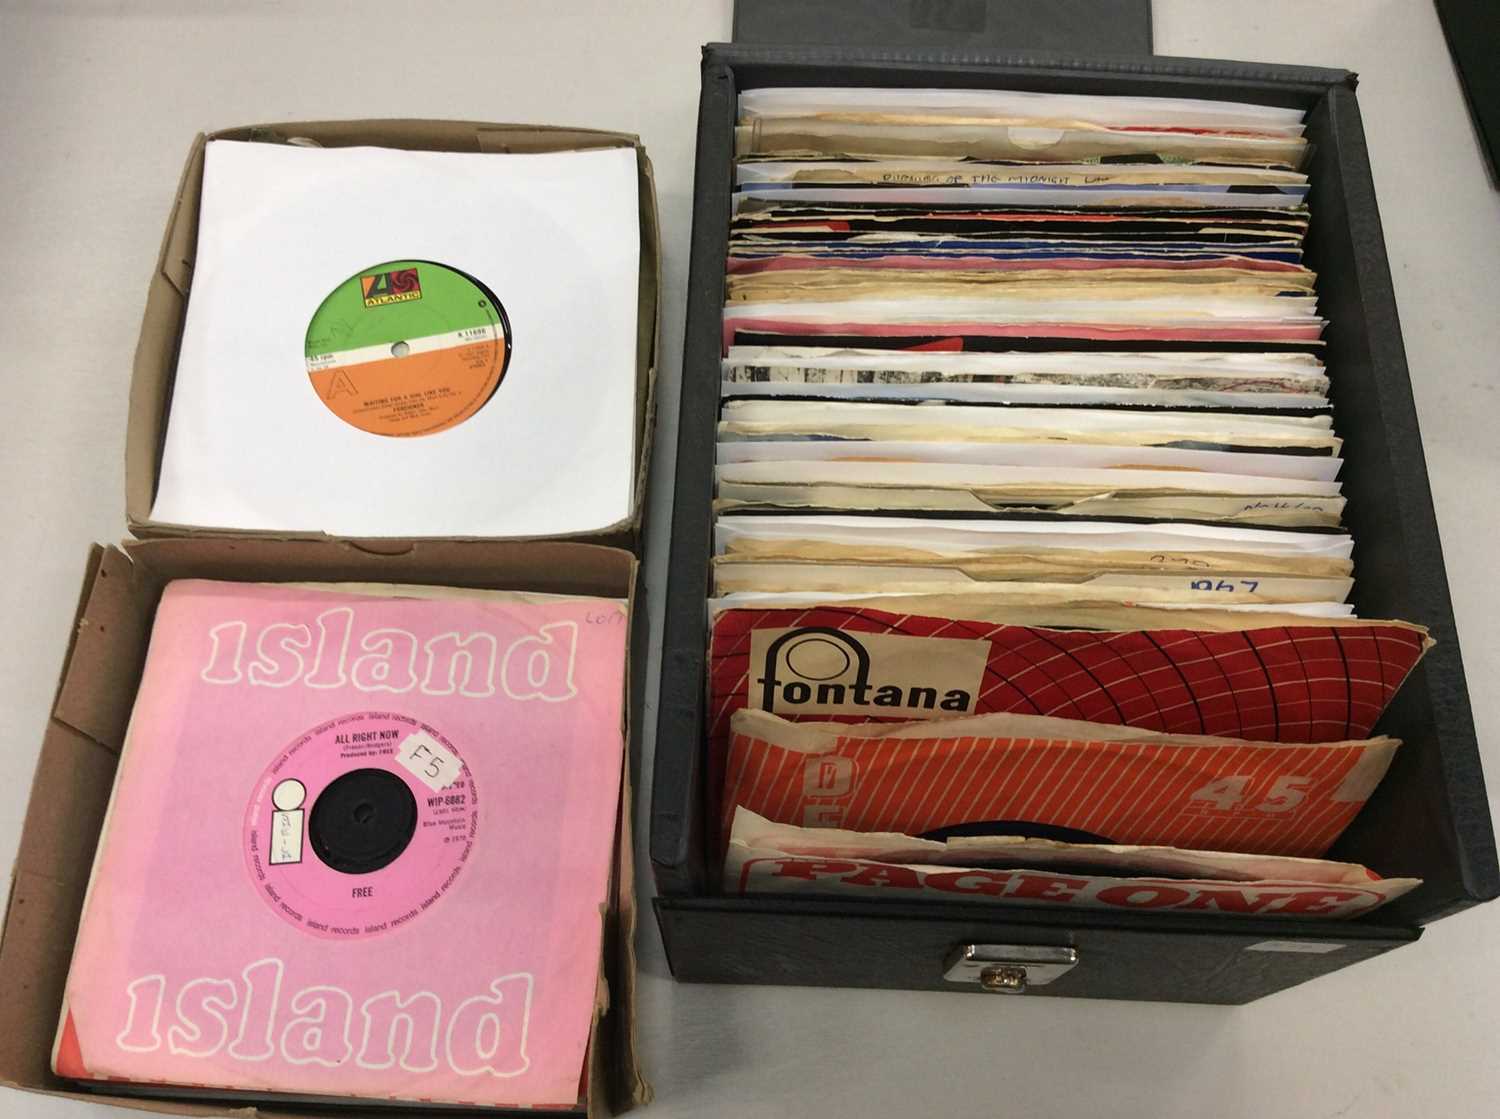 Carrying case of 100 single records including Troggs, Small Faces, Them, Headm Fleetwood Mac, Free, - Image 2 of 2